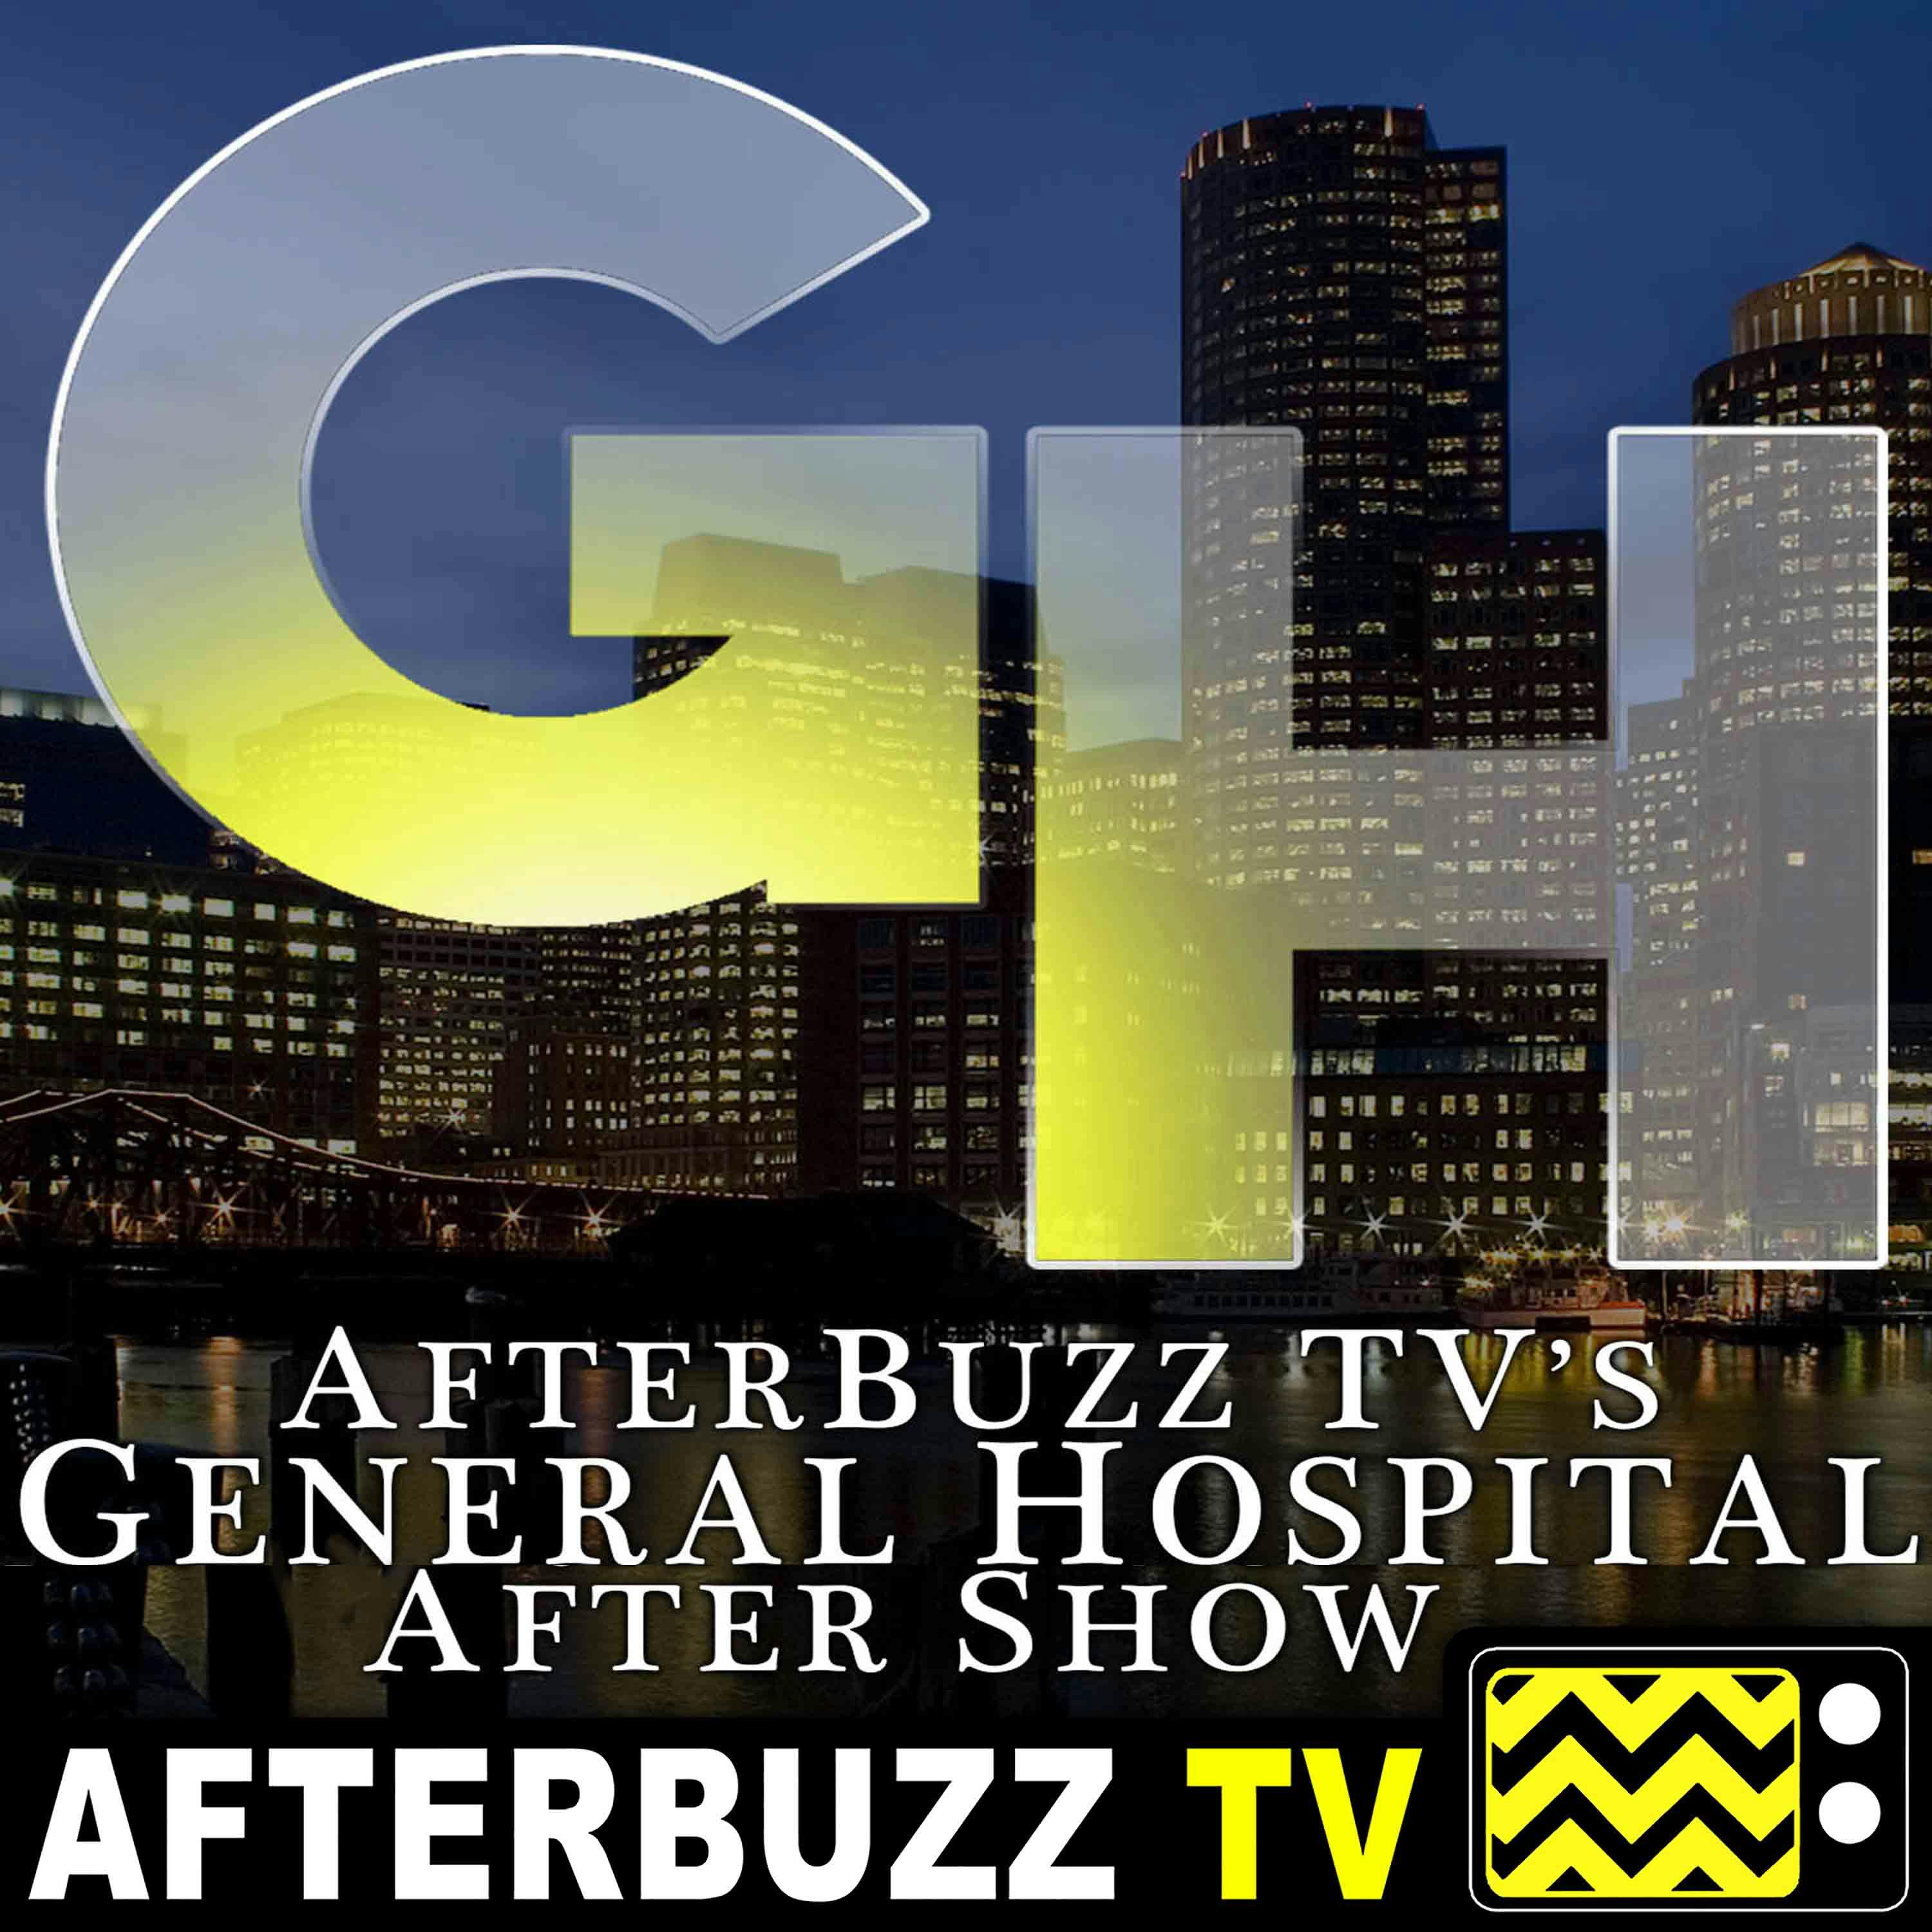 Review Of General Hospital for January 21st - January 25th, 2019